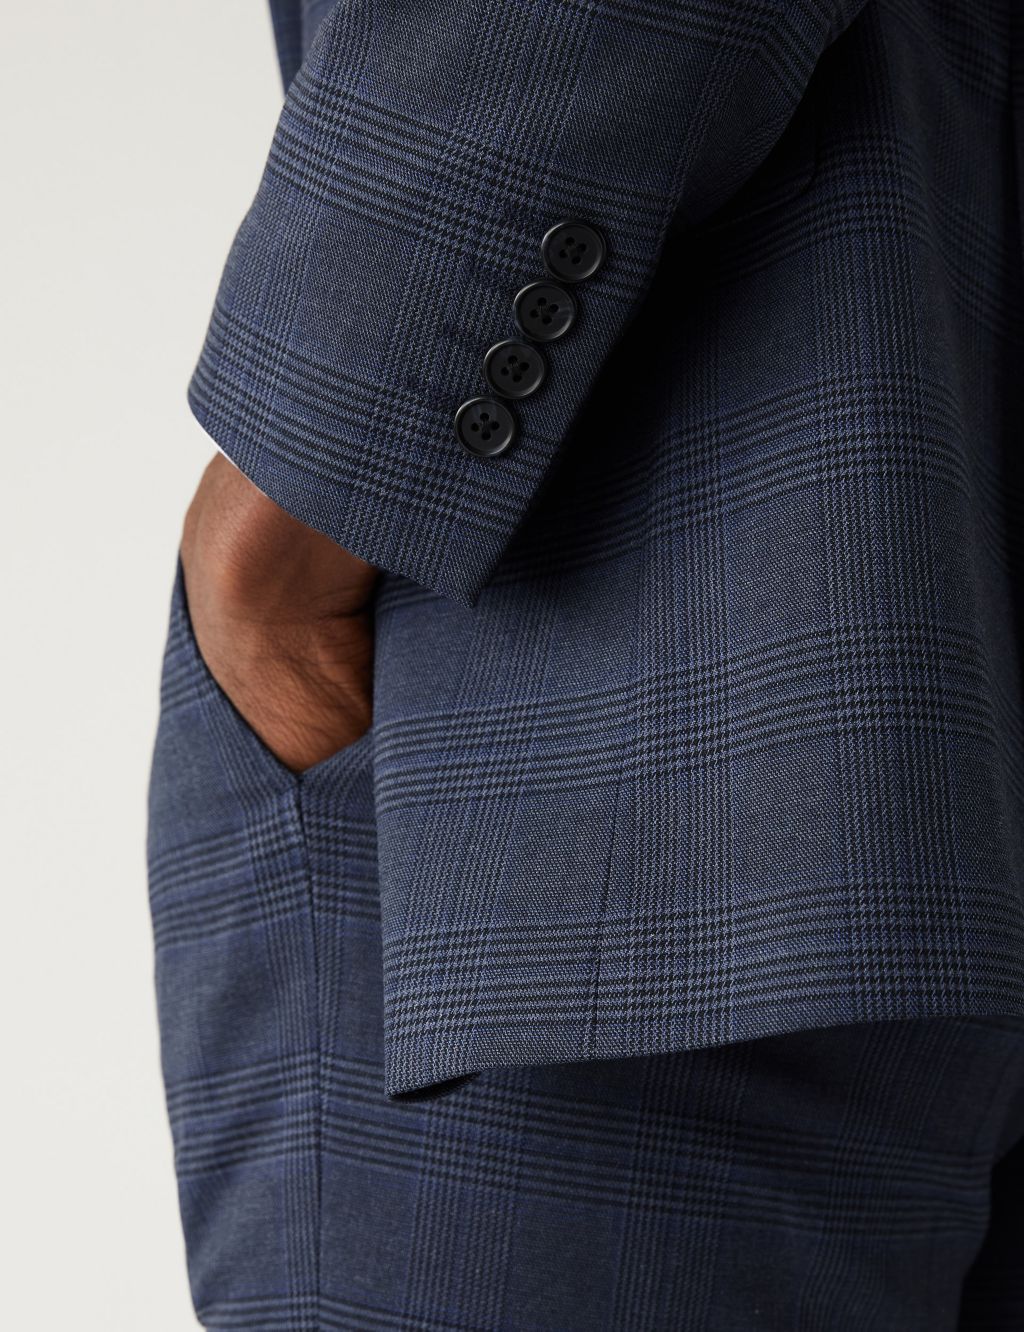 Regular Fit Prince of Wales Check Suit Jacket image 3